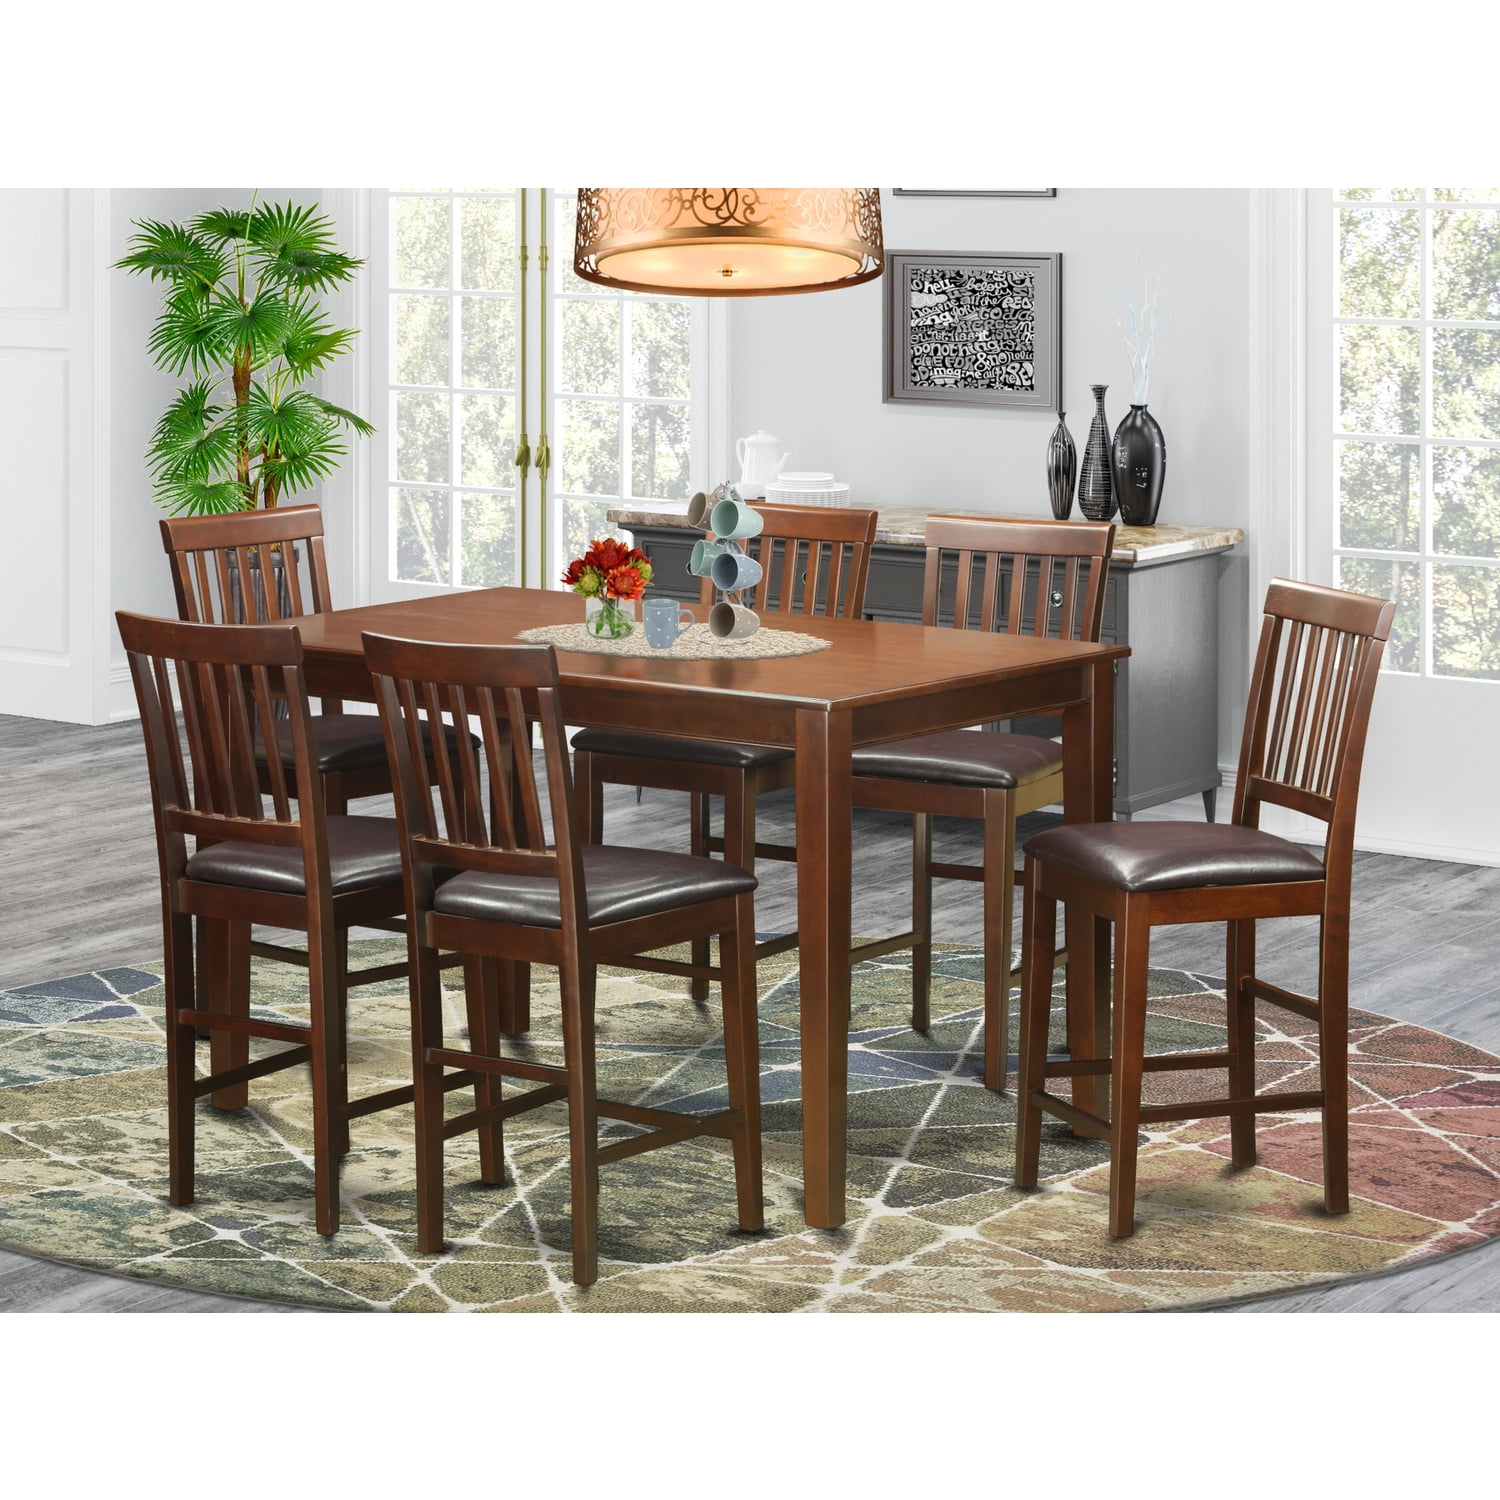 Counter Height Table Set Pub And, Round Pub Table Seats 6